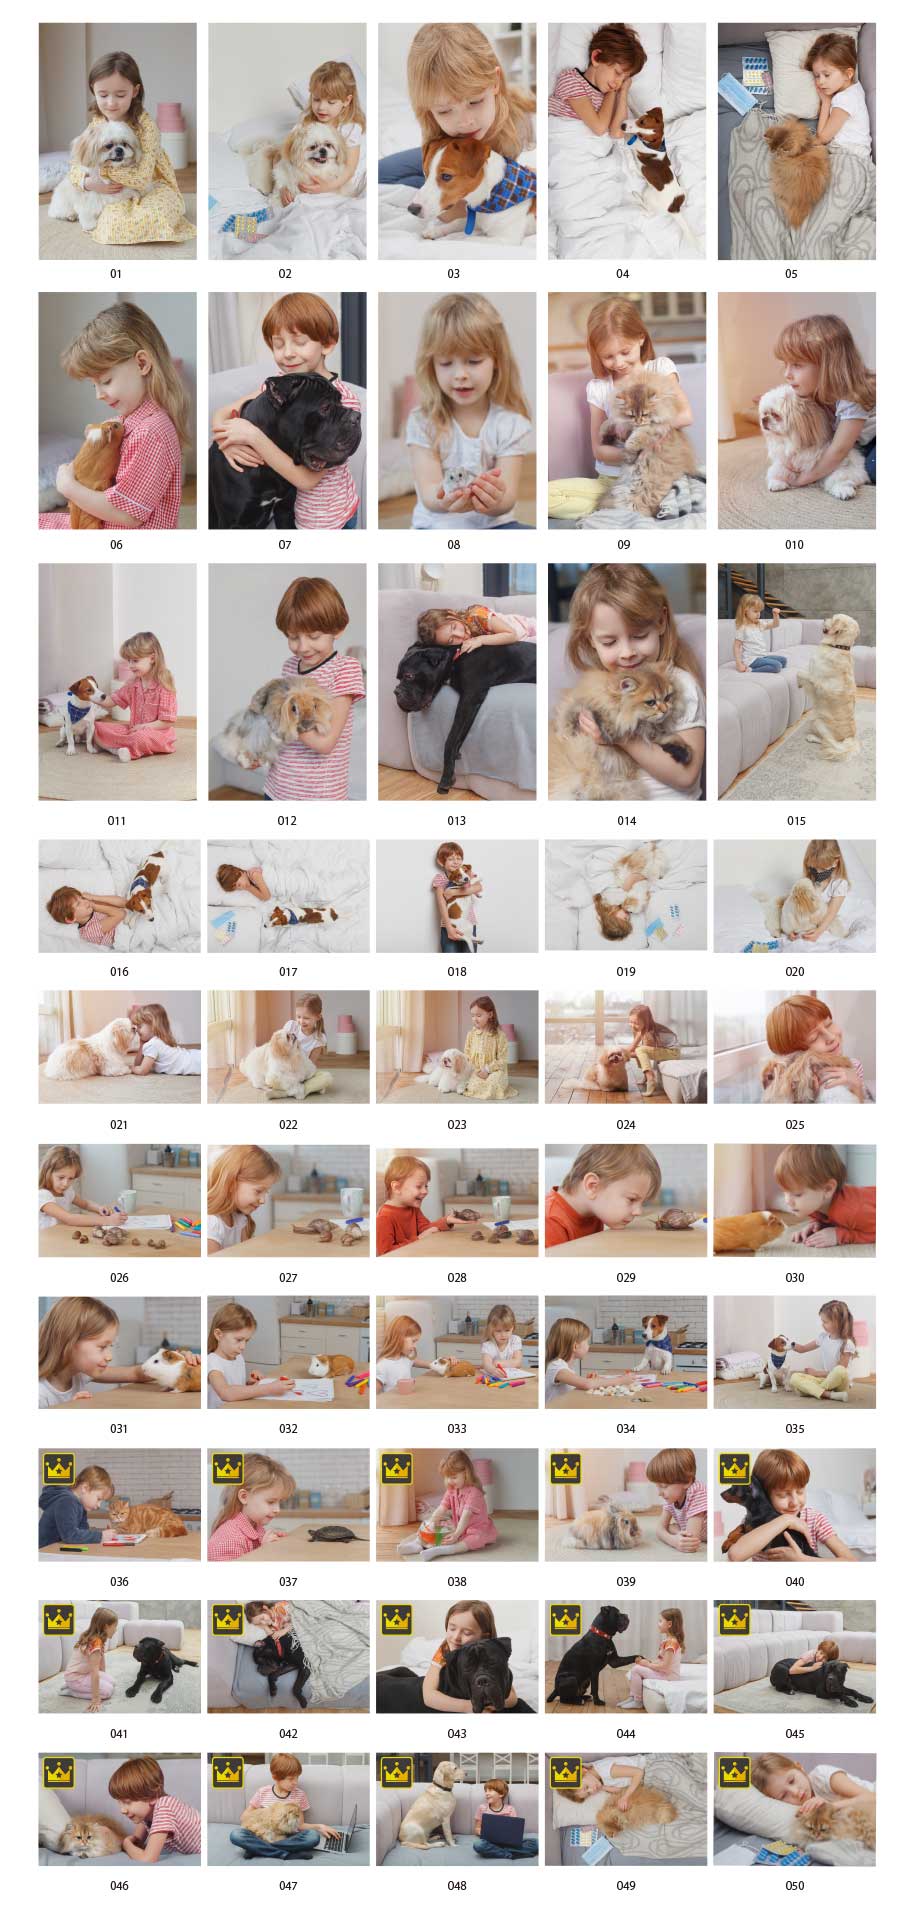 Pictures of children and pets